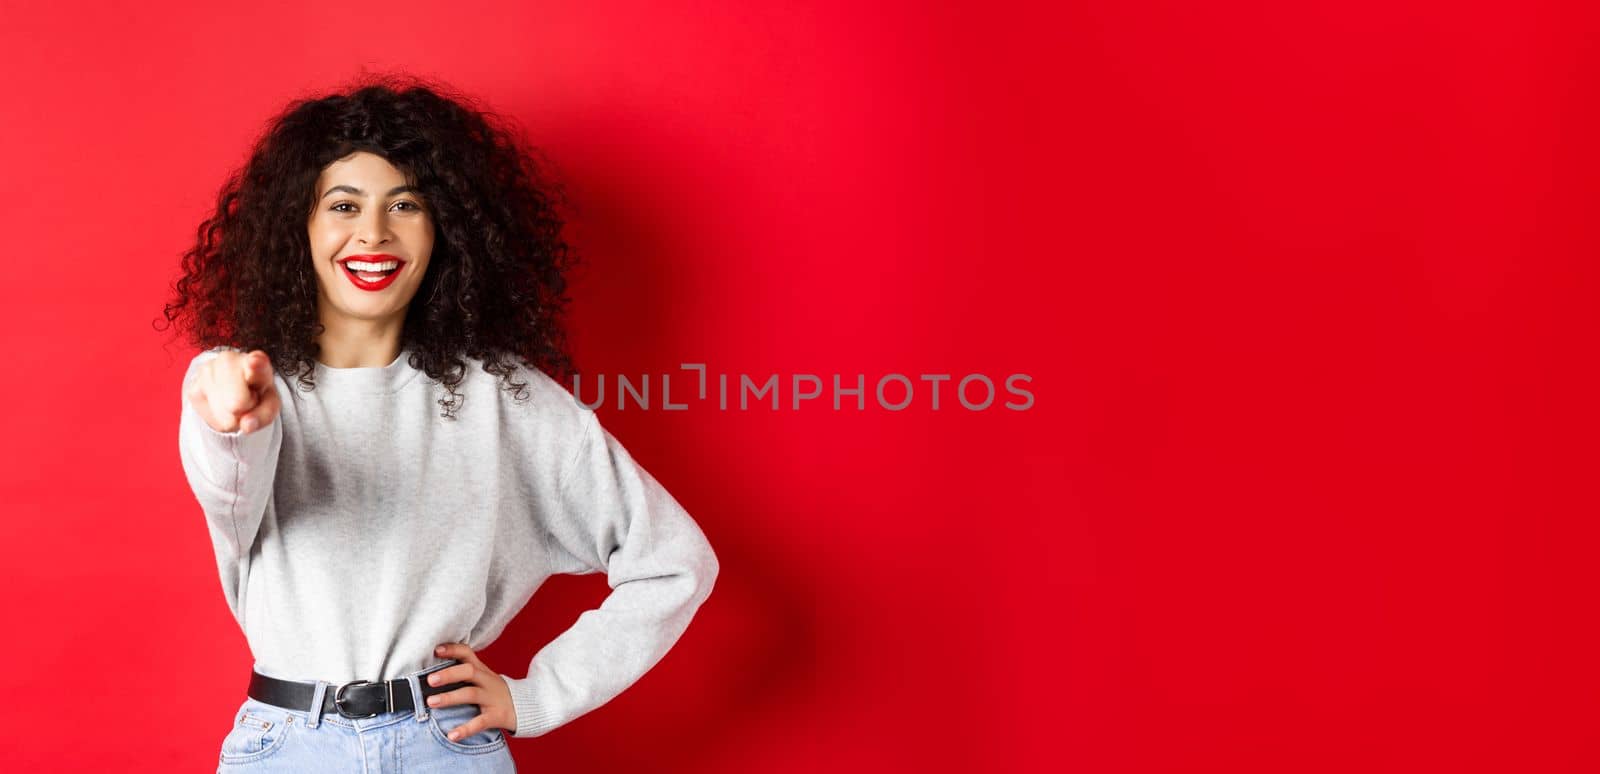 Smiling cheerful woman with curly hairstyle, pointing fingers at camera, inviting you, choosing someone, standing on red background.